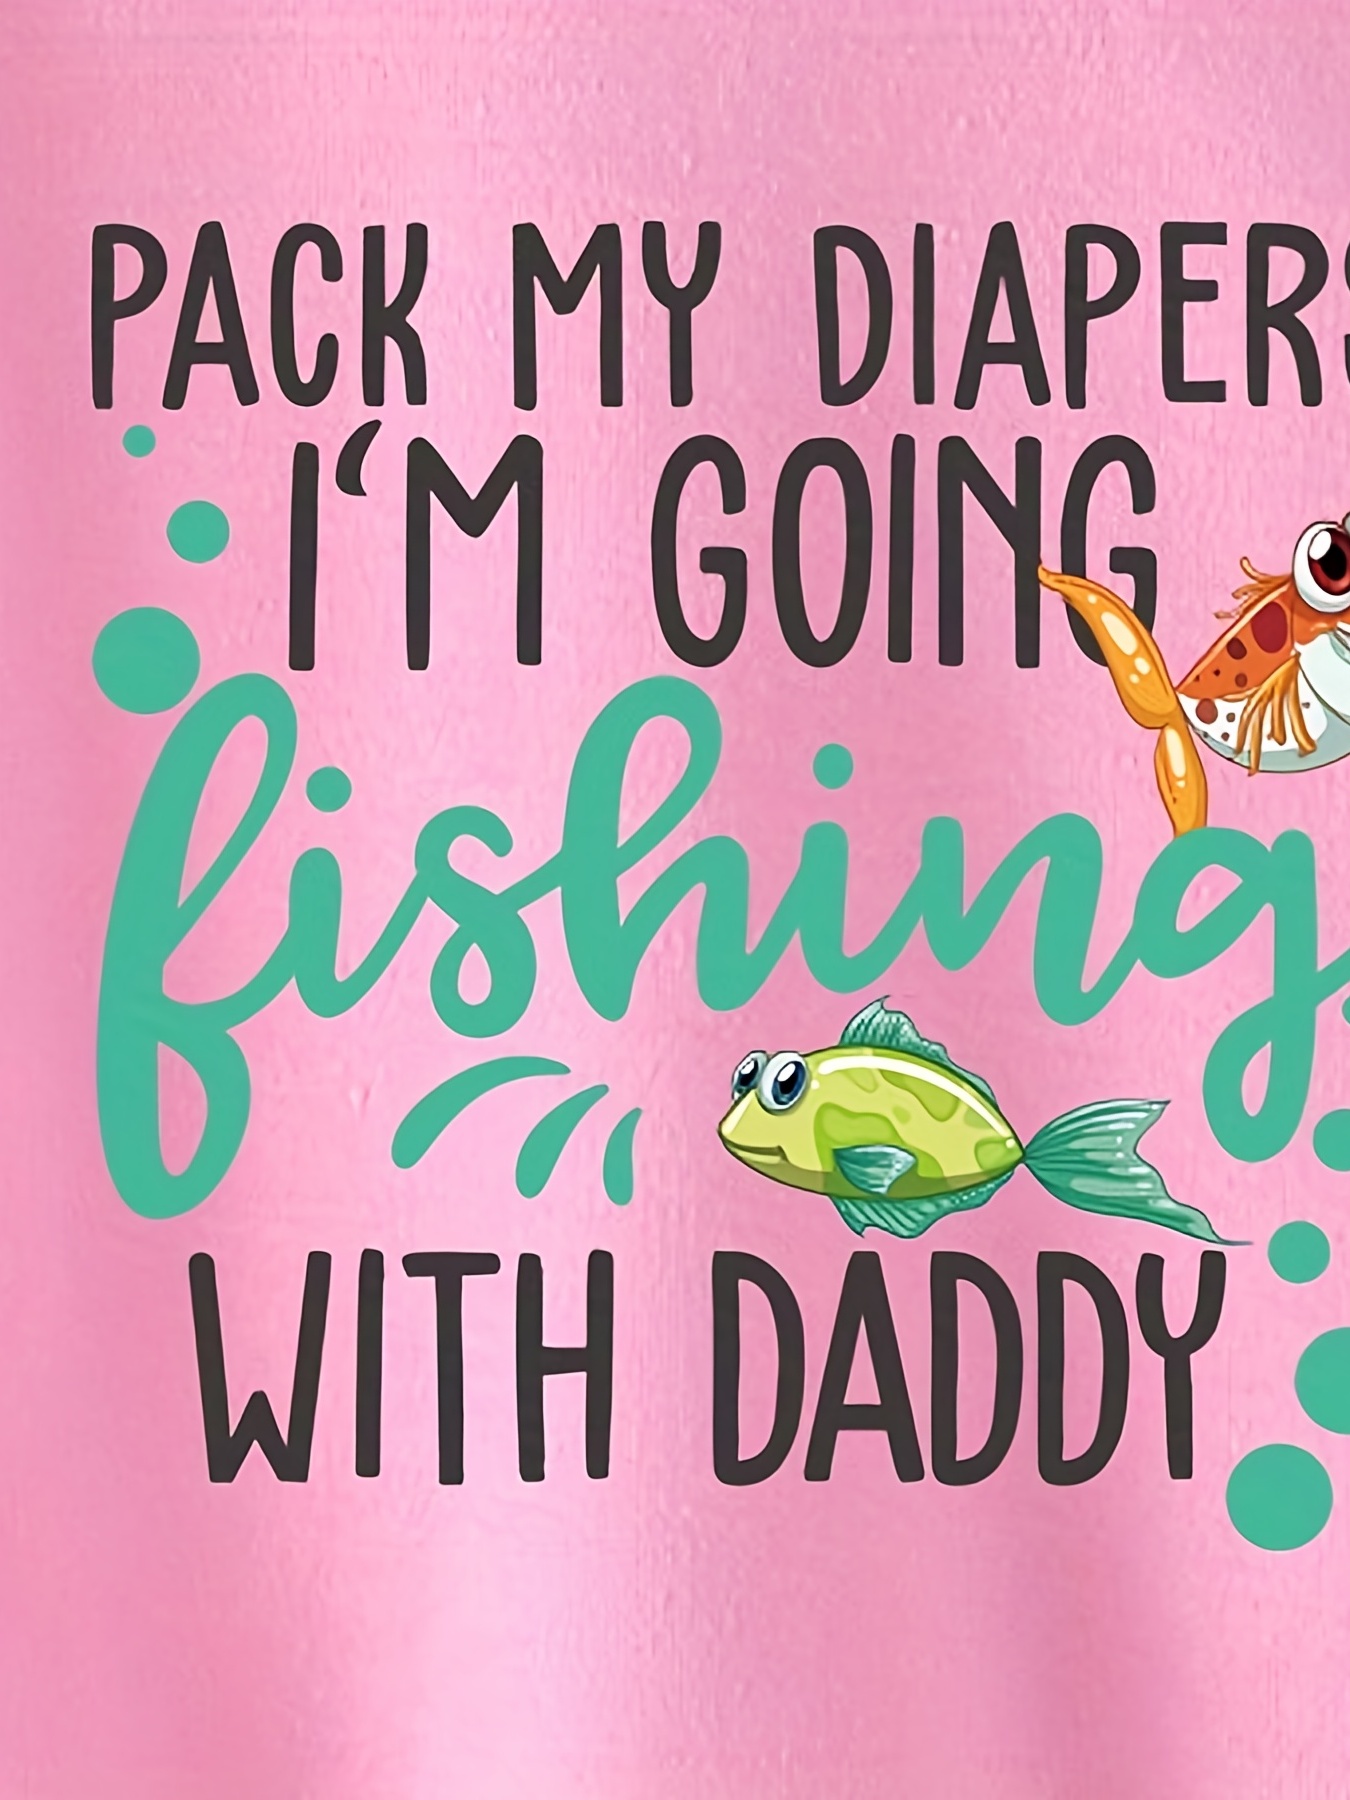 Baby Boys Casual Pack My Diapers Im Going Fishing With Daddy - Temu